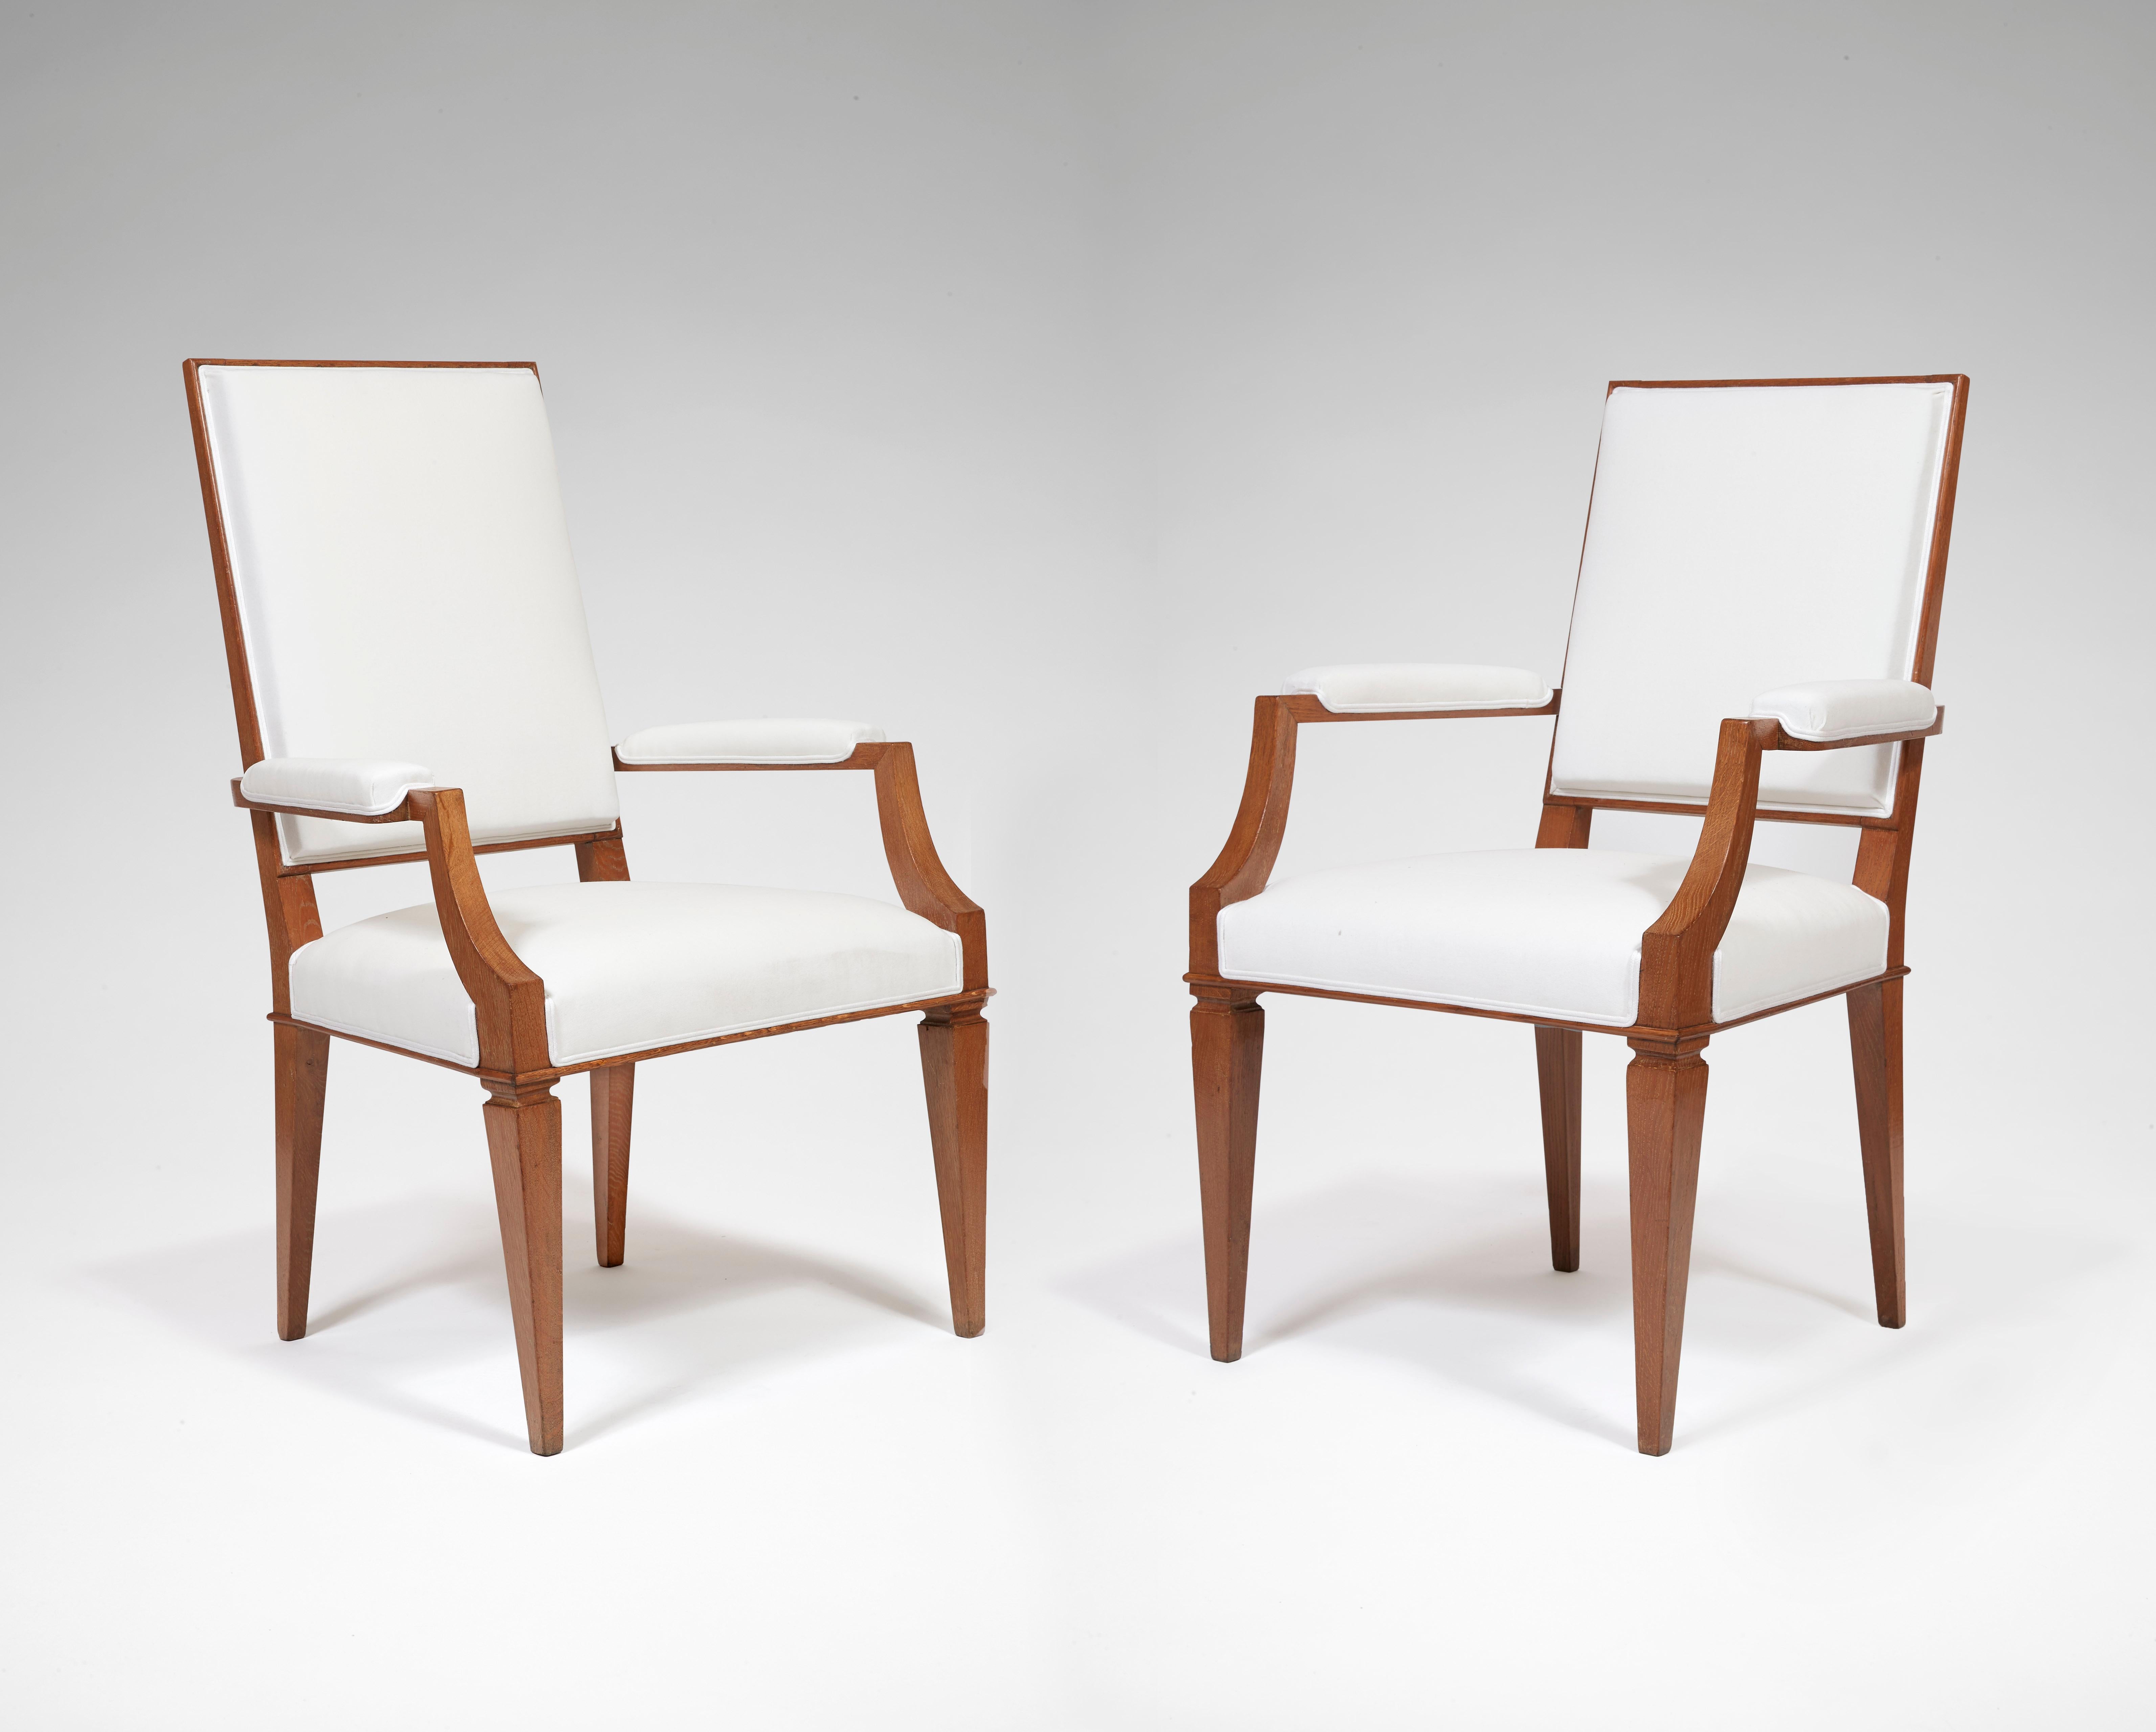 In ceruse oak wood, tapered legs with an ornate frieze at the top, conical at the front and slightly sabre at the back, the backs and the seats covered with white fabric. Sell as pairs, two pairs available and one single.

Furniture created by André